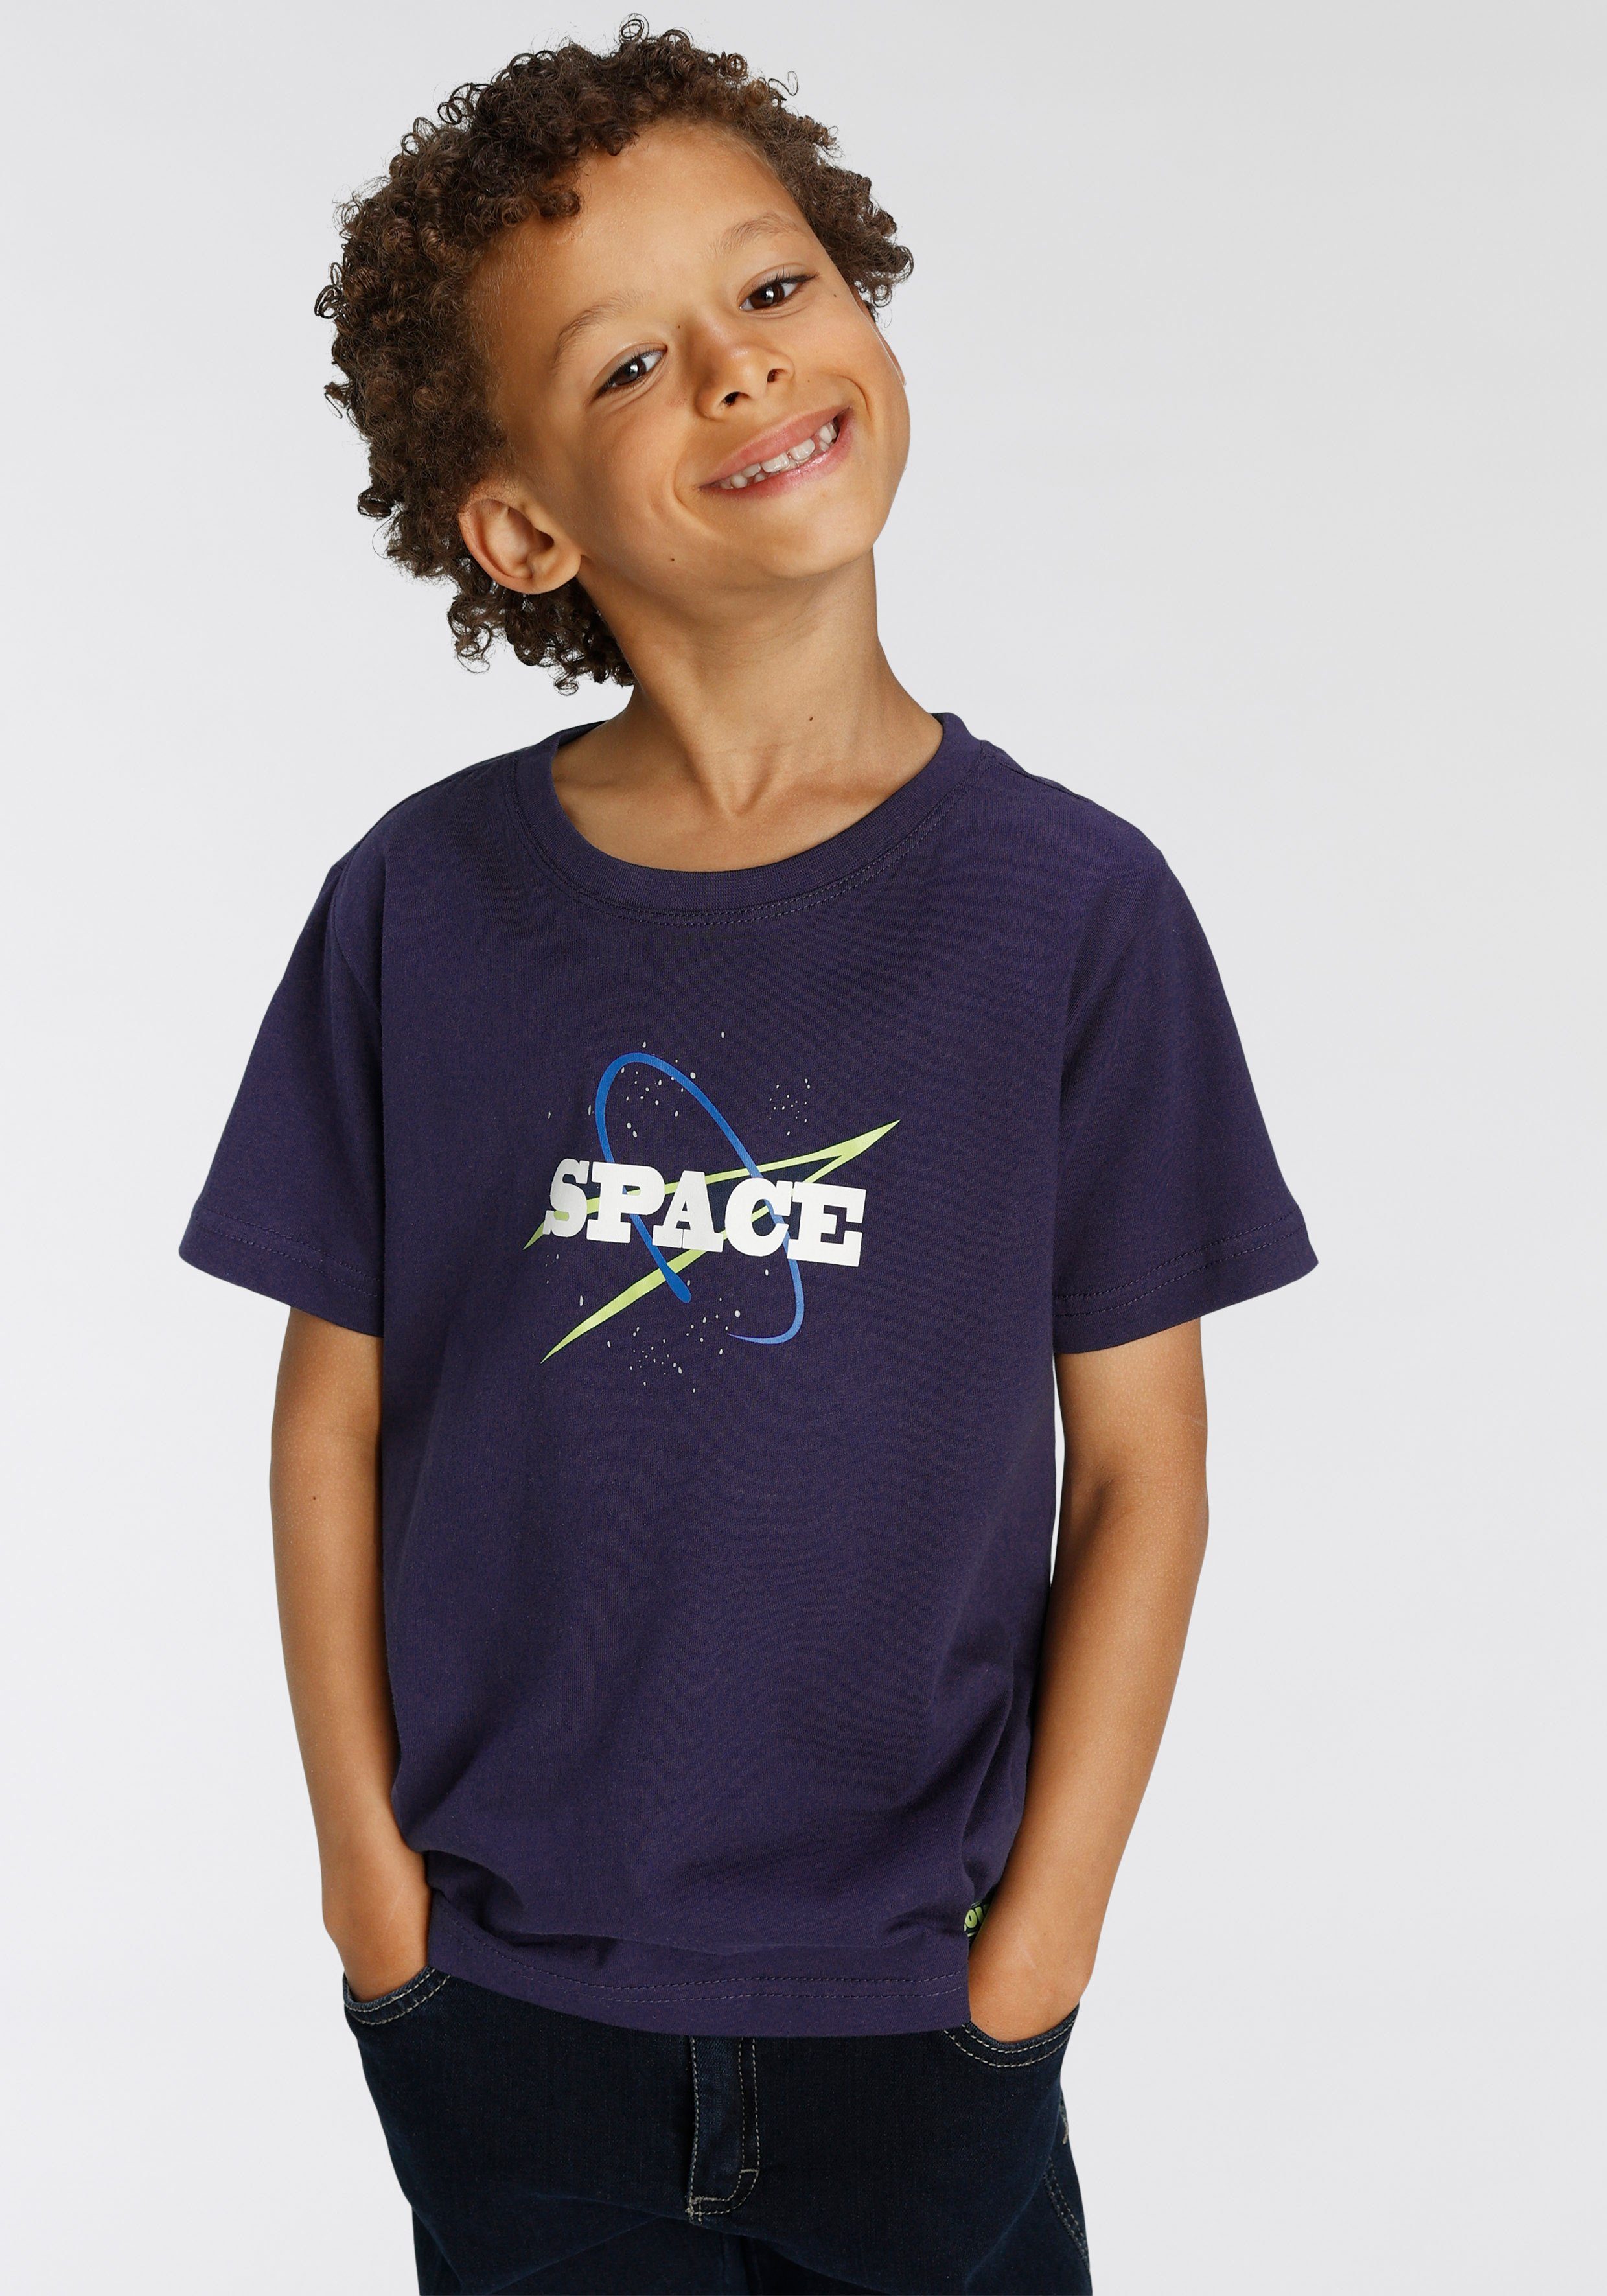 Scout T-Shirt SPACE Bio-Baumwolle (Packung, 2er-Pack) aus